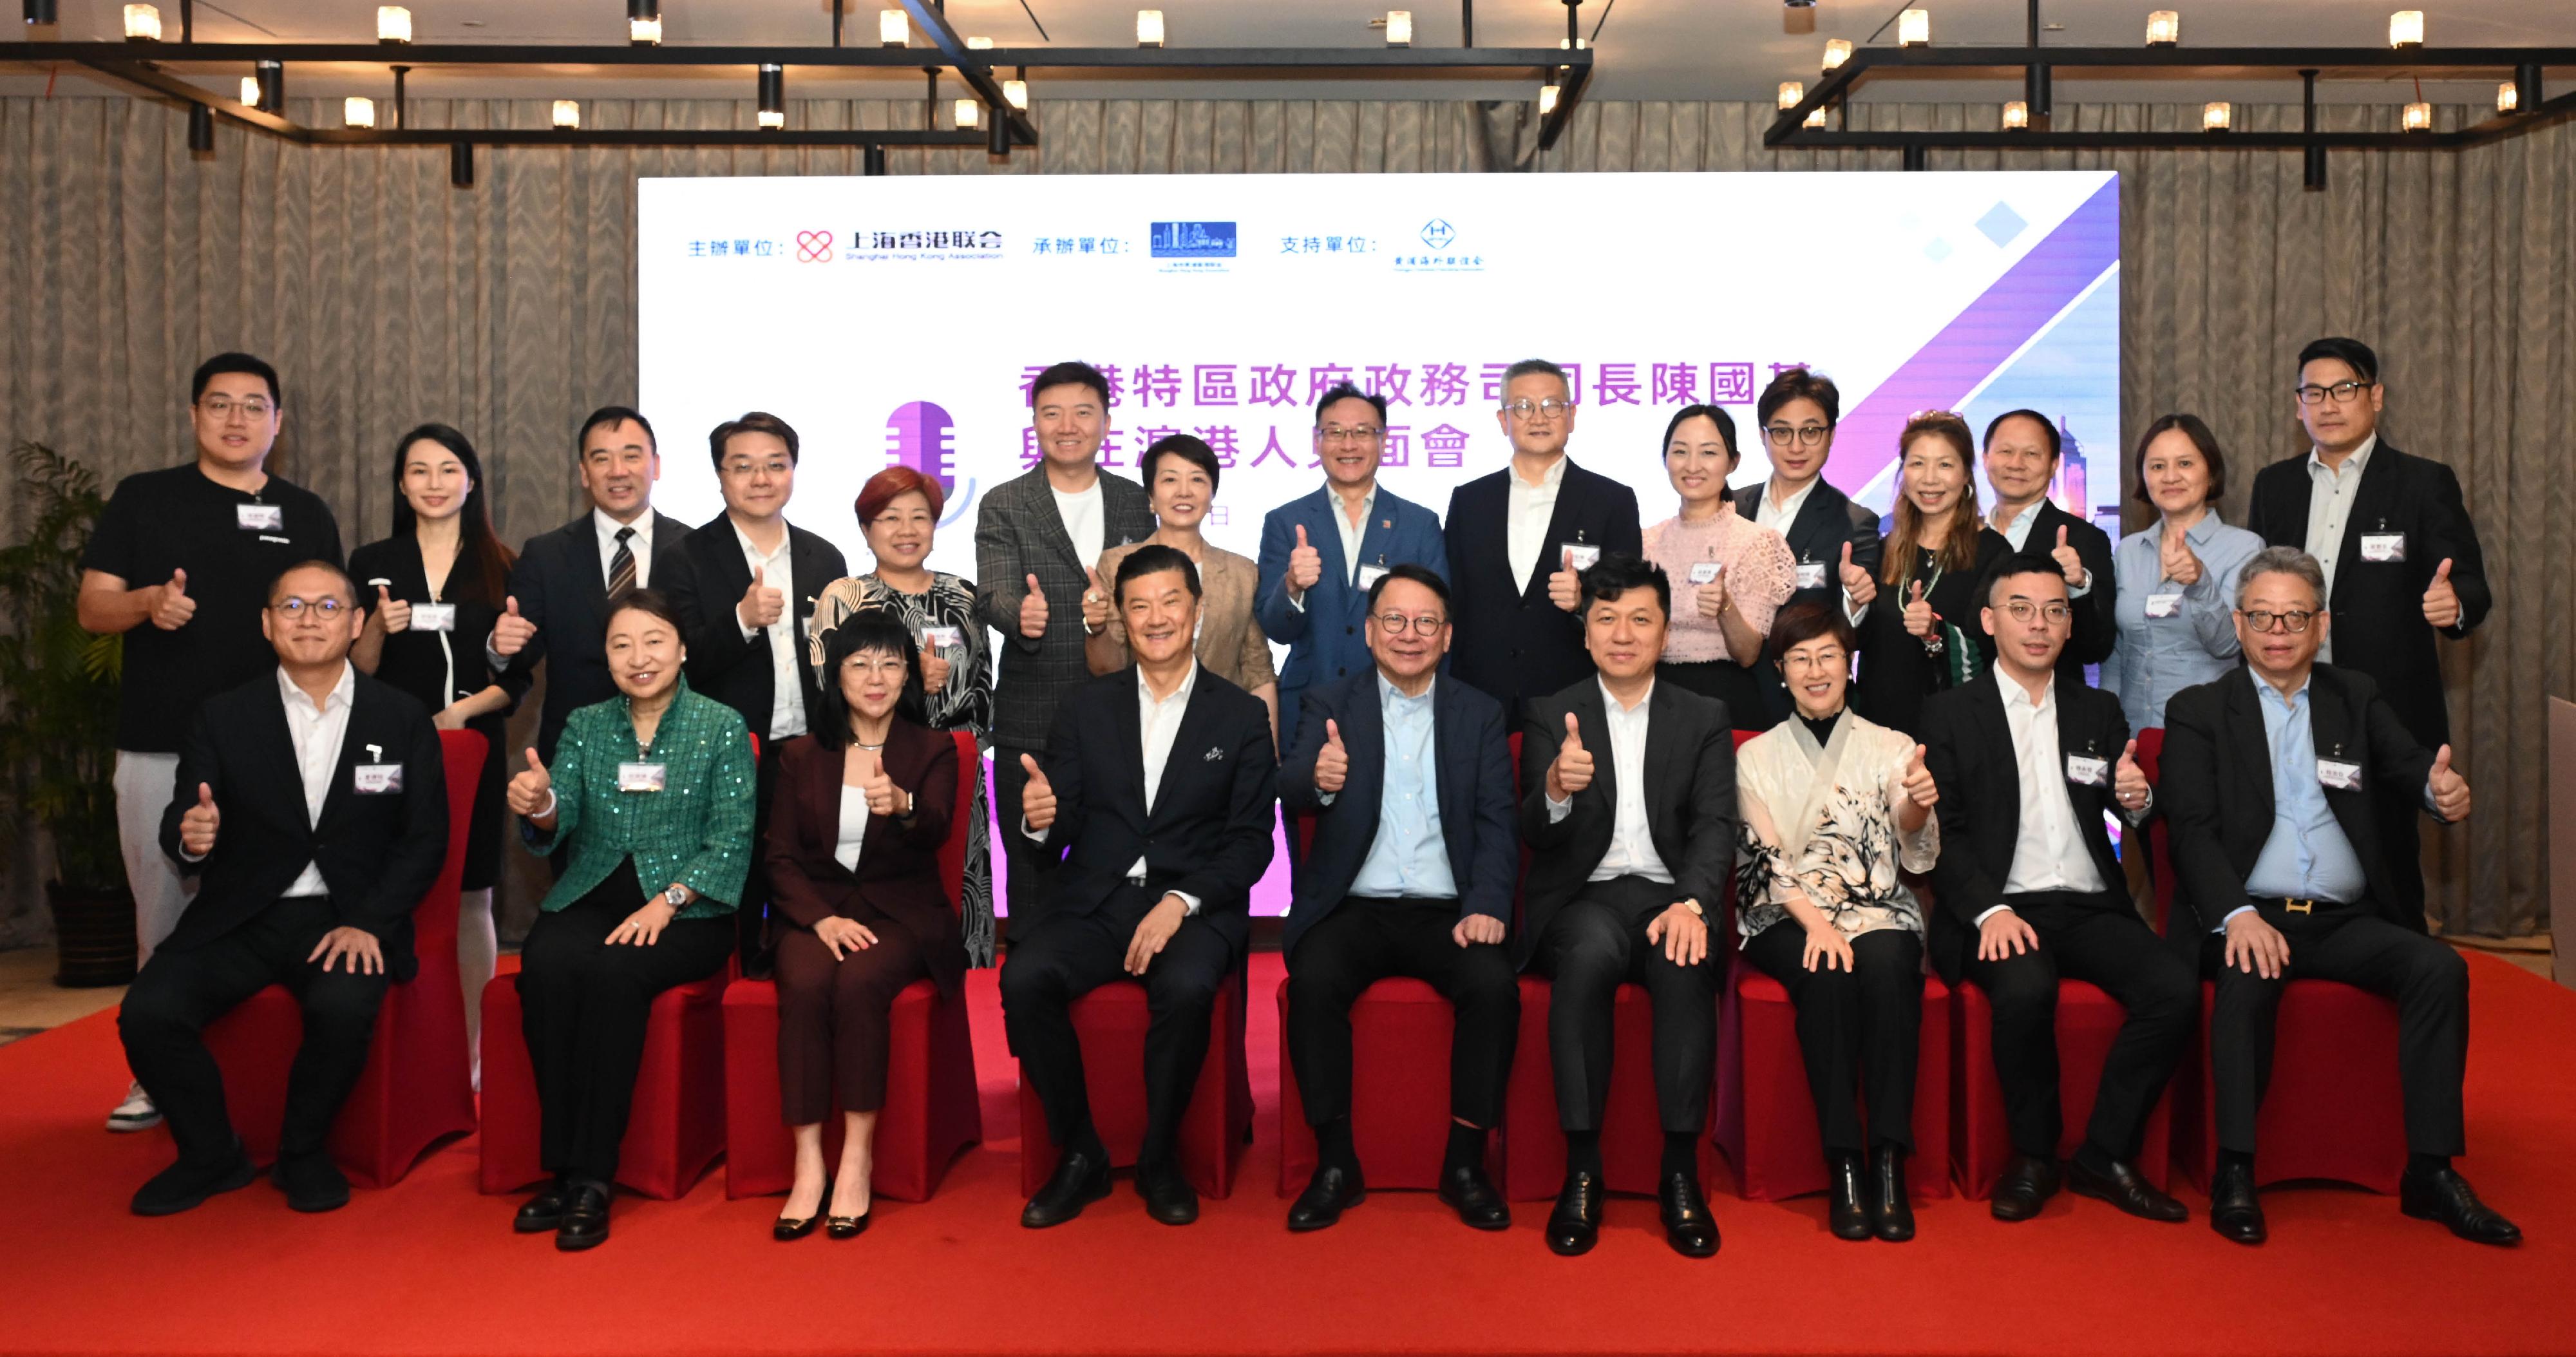 The Chief Secretary for Administration, Mr Chan Kwok-ki, visited Shanghai today (June 25). Photo shows Mr Chan (front row, centre); the Honorary Founding Chairman of the Shanghai Hong Kong Association, Mr Andrew Yao (front row, fourth left); the Chairman of the Shanghai Hong Kong Association, Mr Harry Yiu (front row, fourth right); and other guests at the meet-and-greet session held by the Shanghai Hong Kong Association.